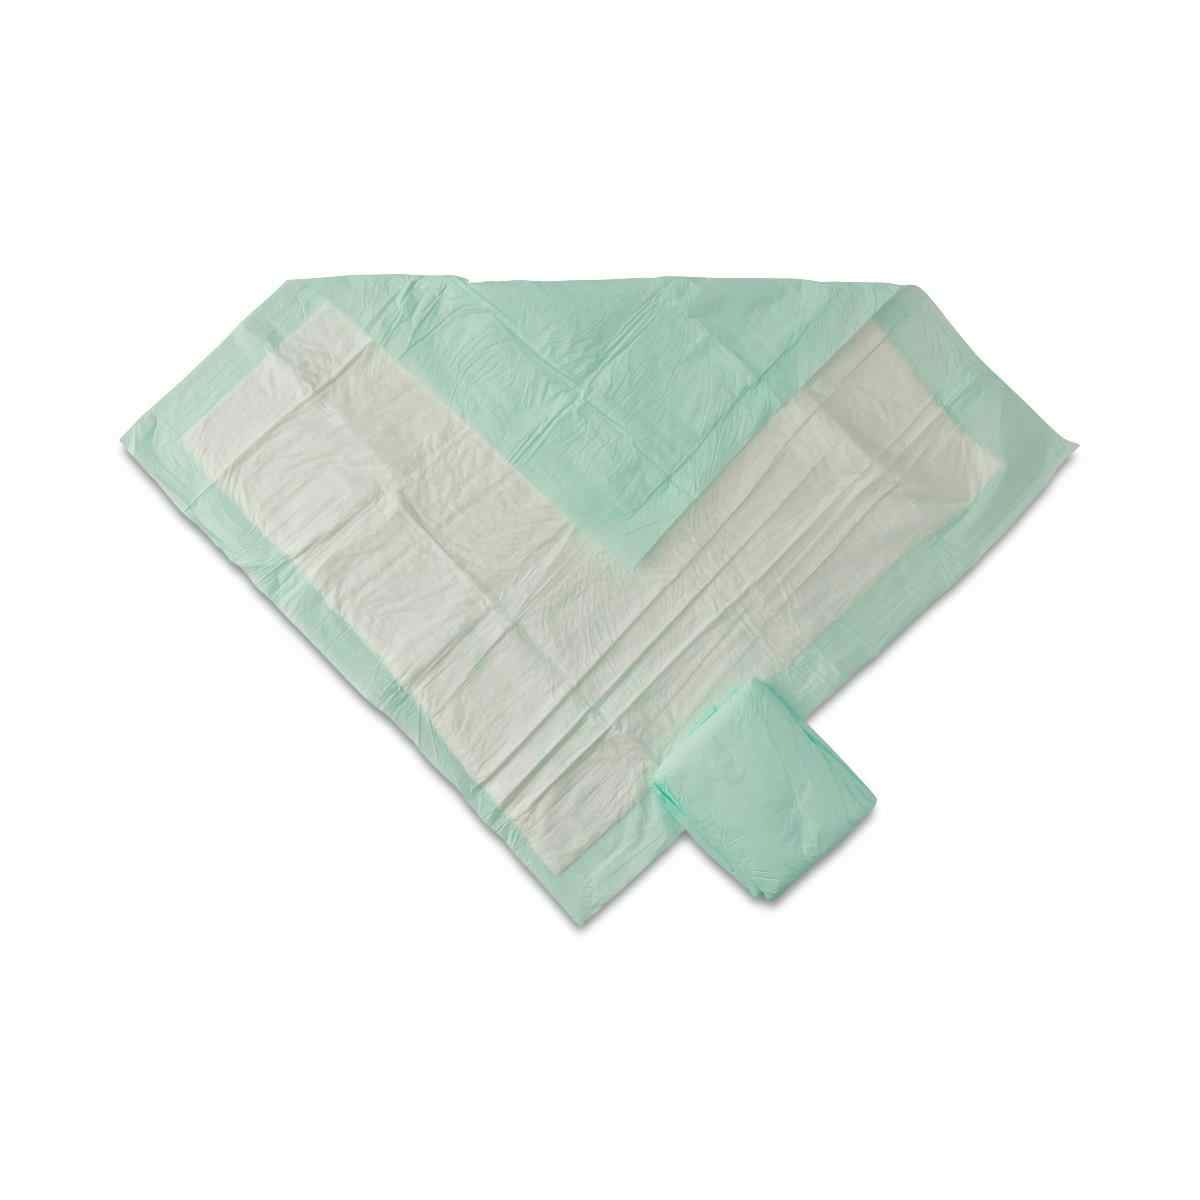 Medline Premium Disposable Underpads, Heavy Absorbency, MUP0305PZ, 30" X 30" - Bag of 10